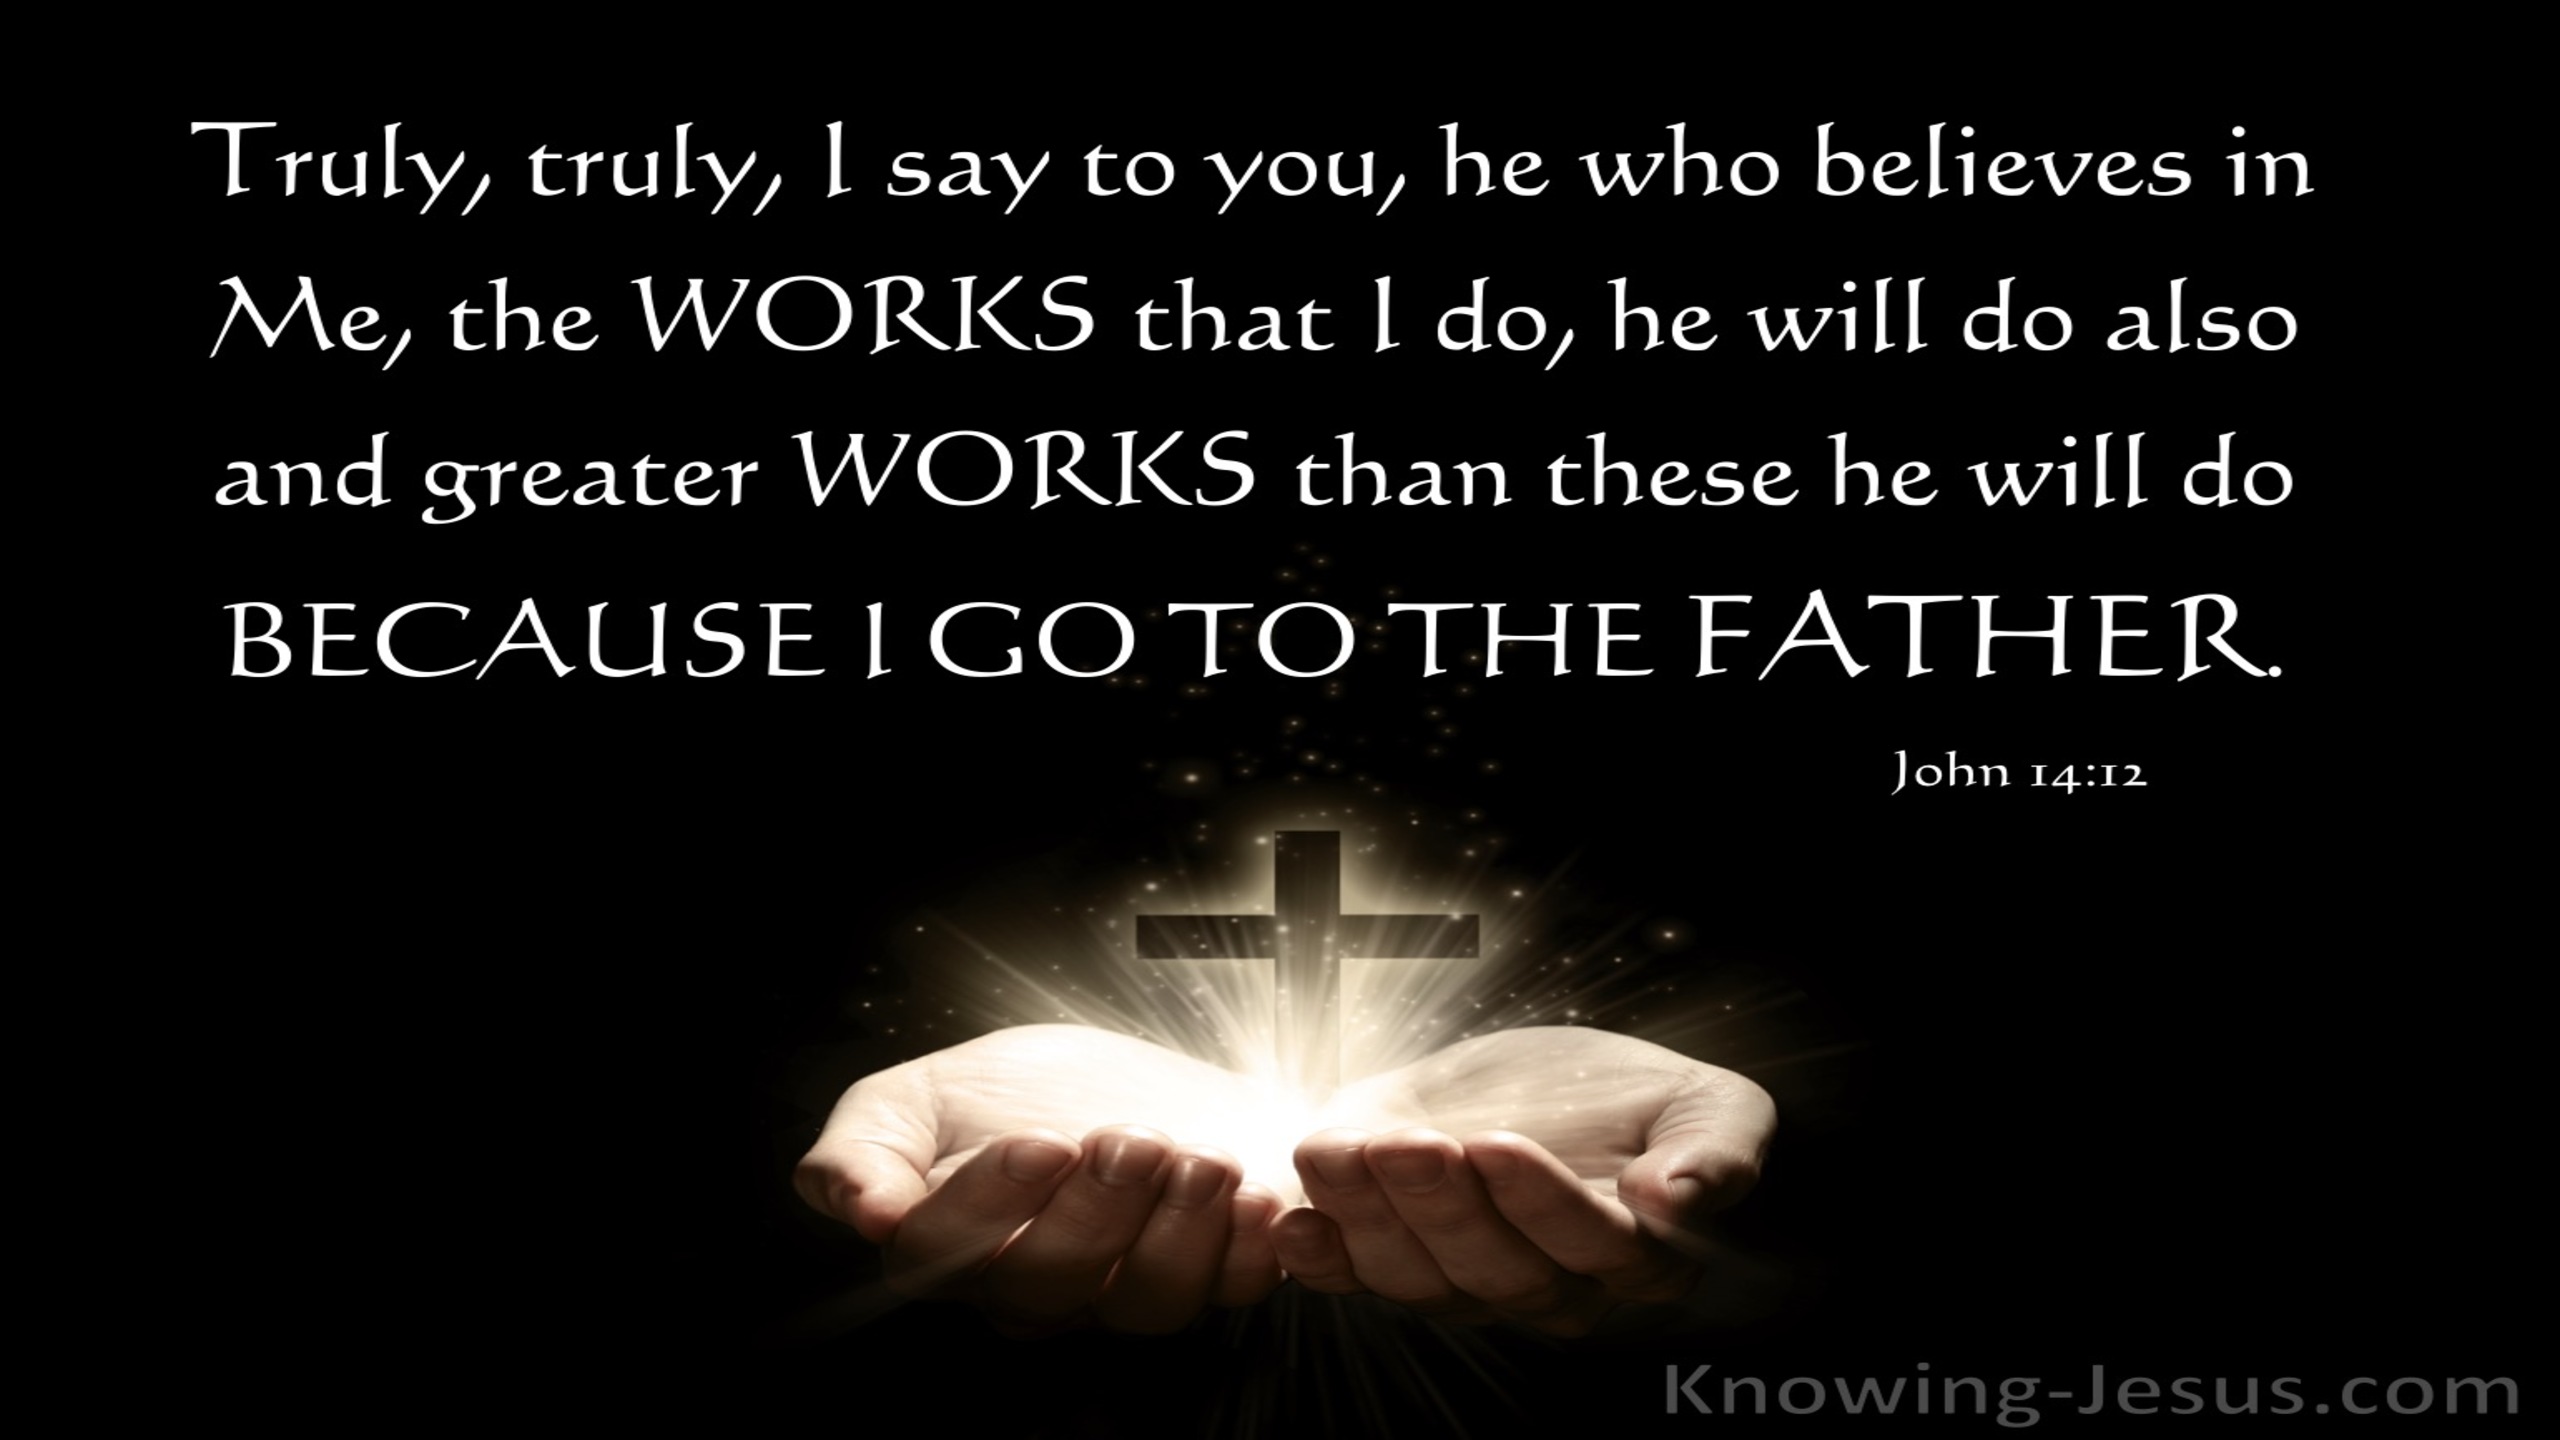 John 14:12 Greater Works Than These He Will Do (black)